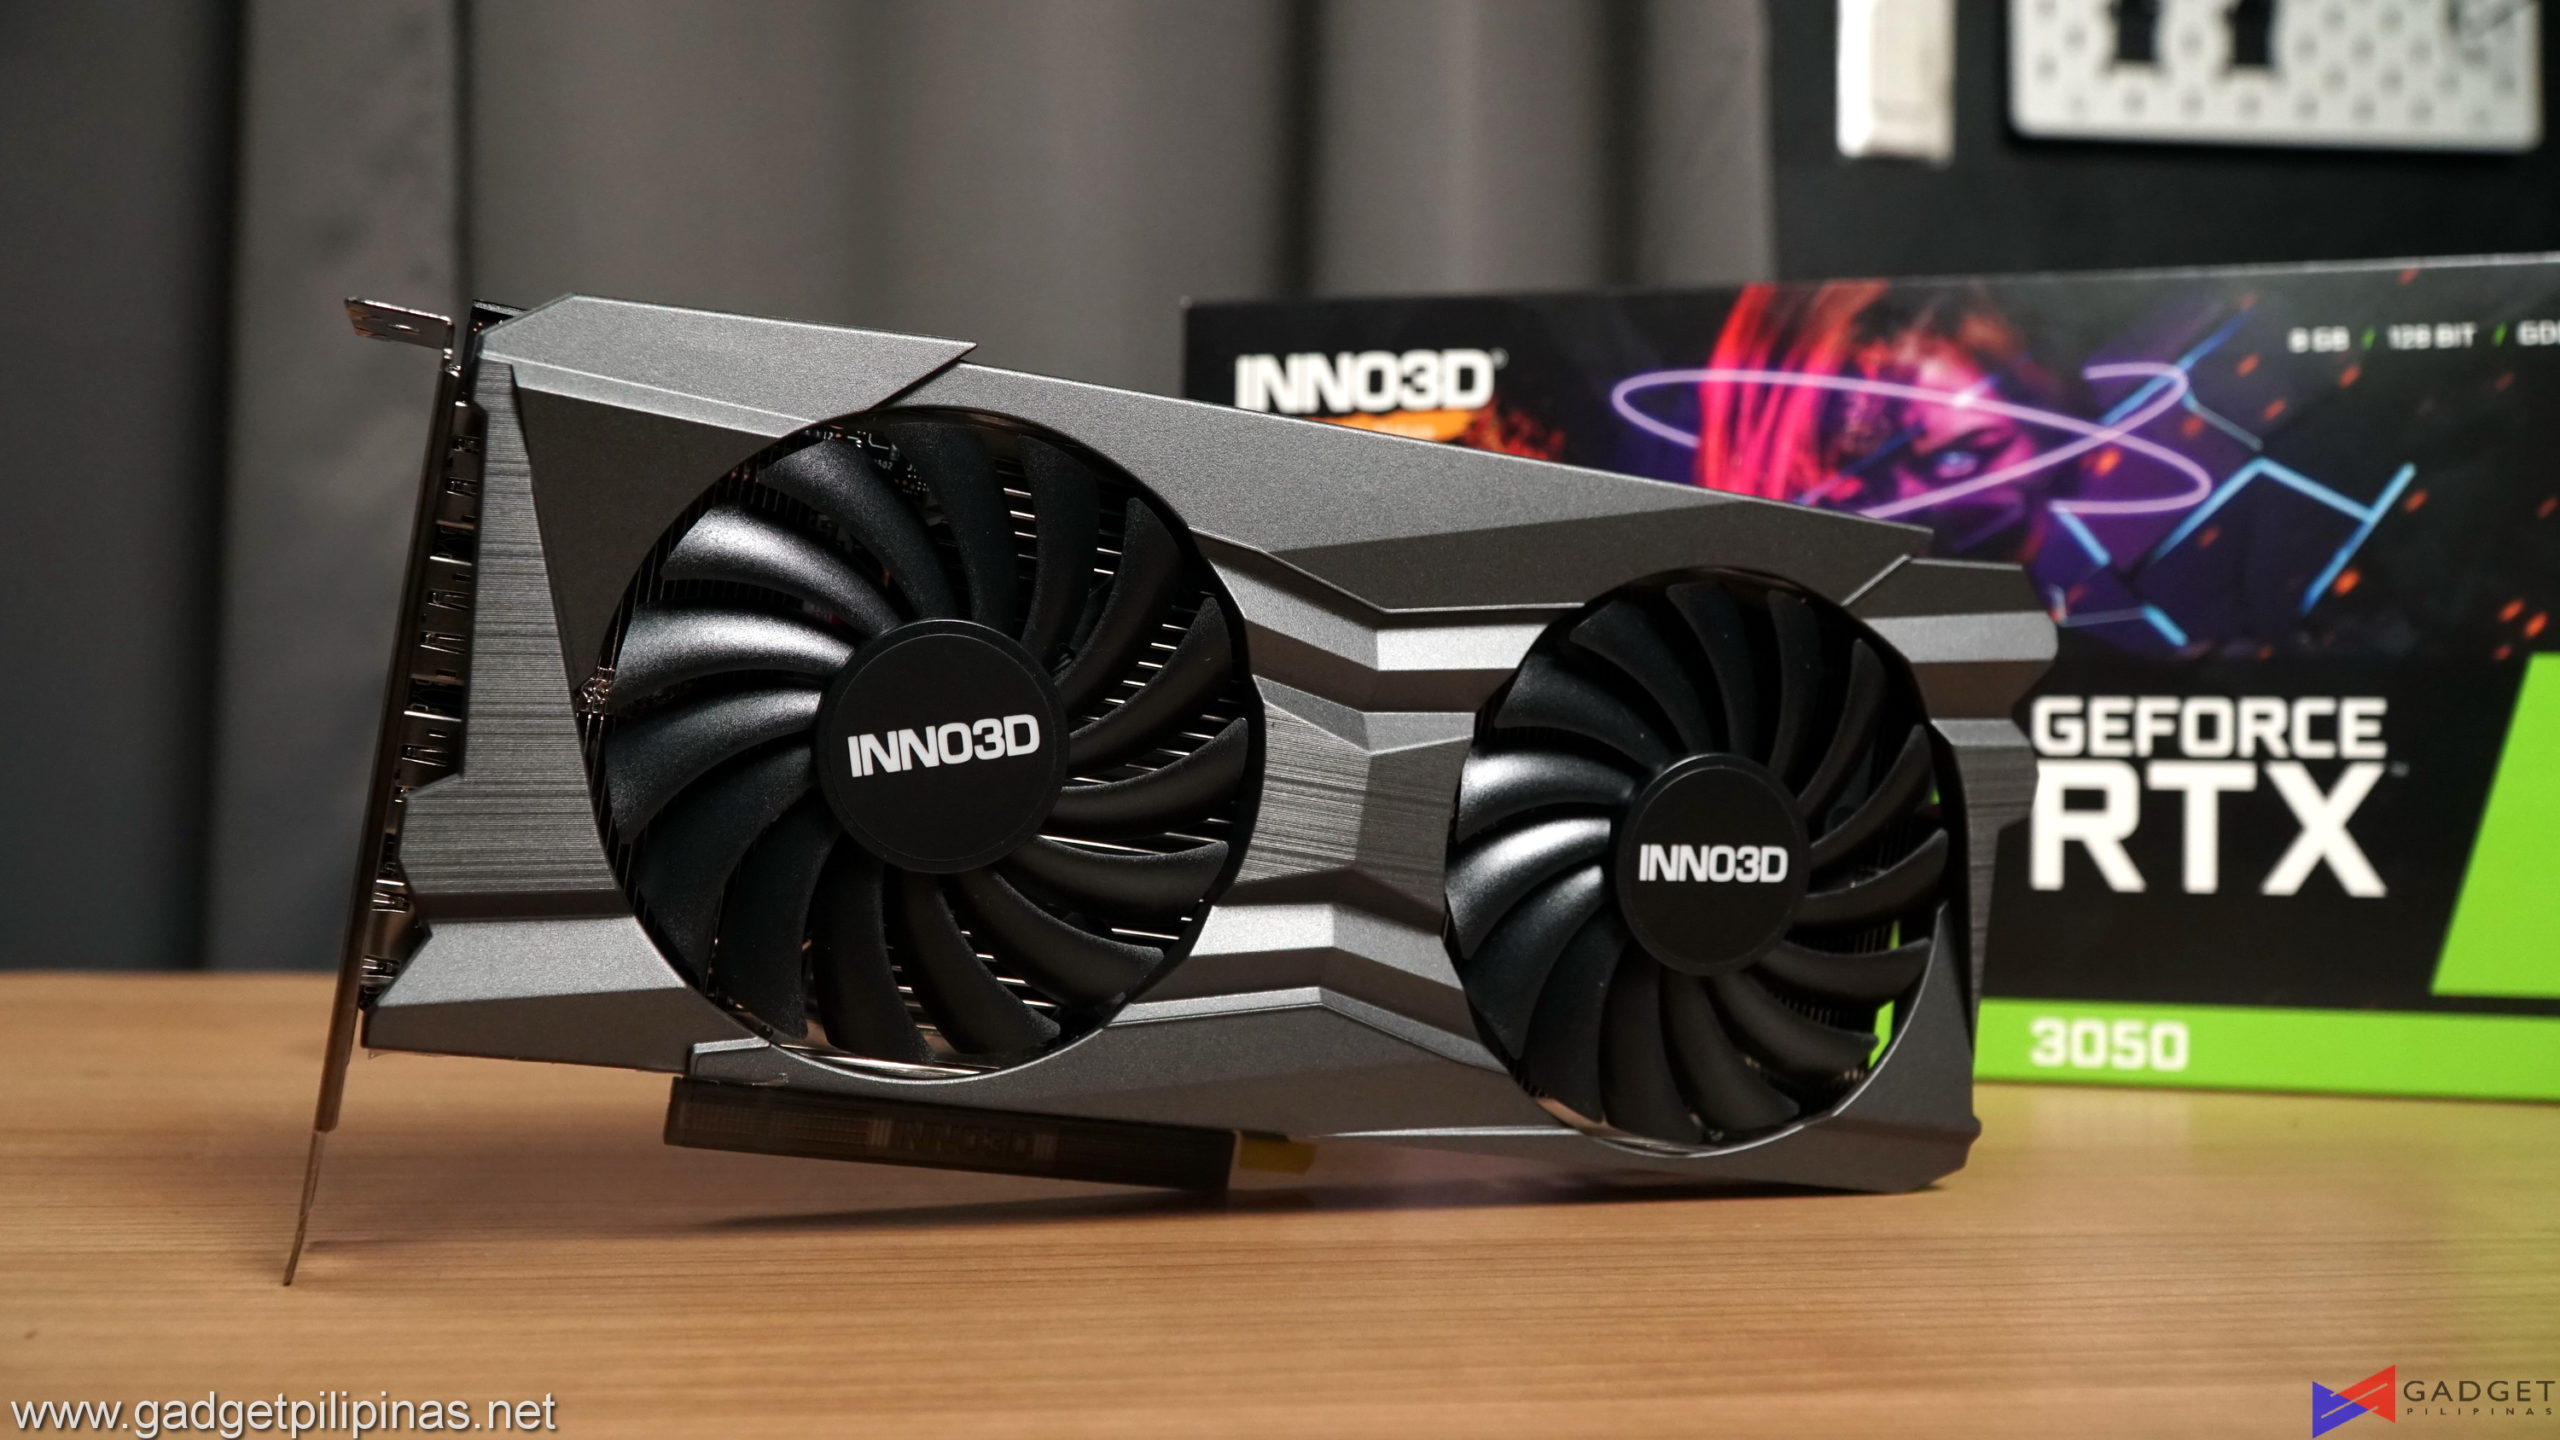 Inno3D RTX 3050 Graphics Review OC Twin X2 Card